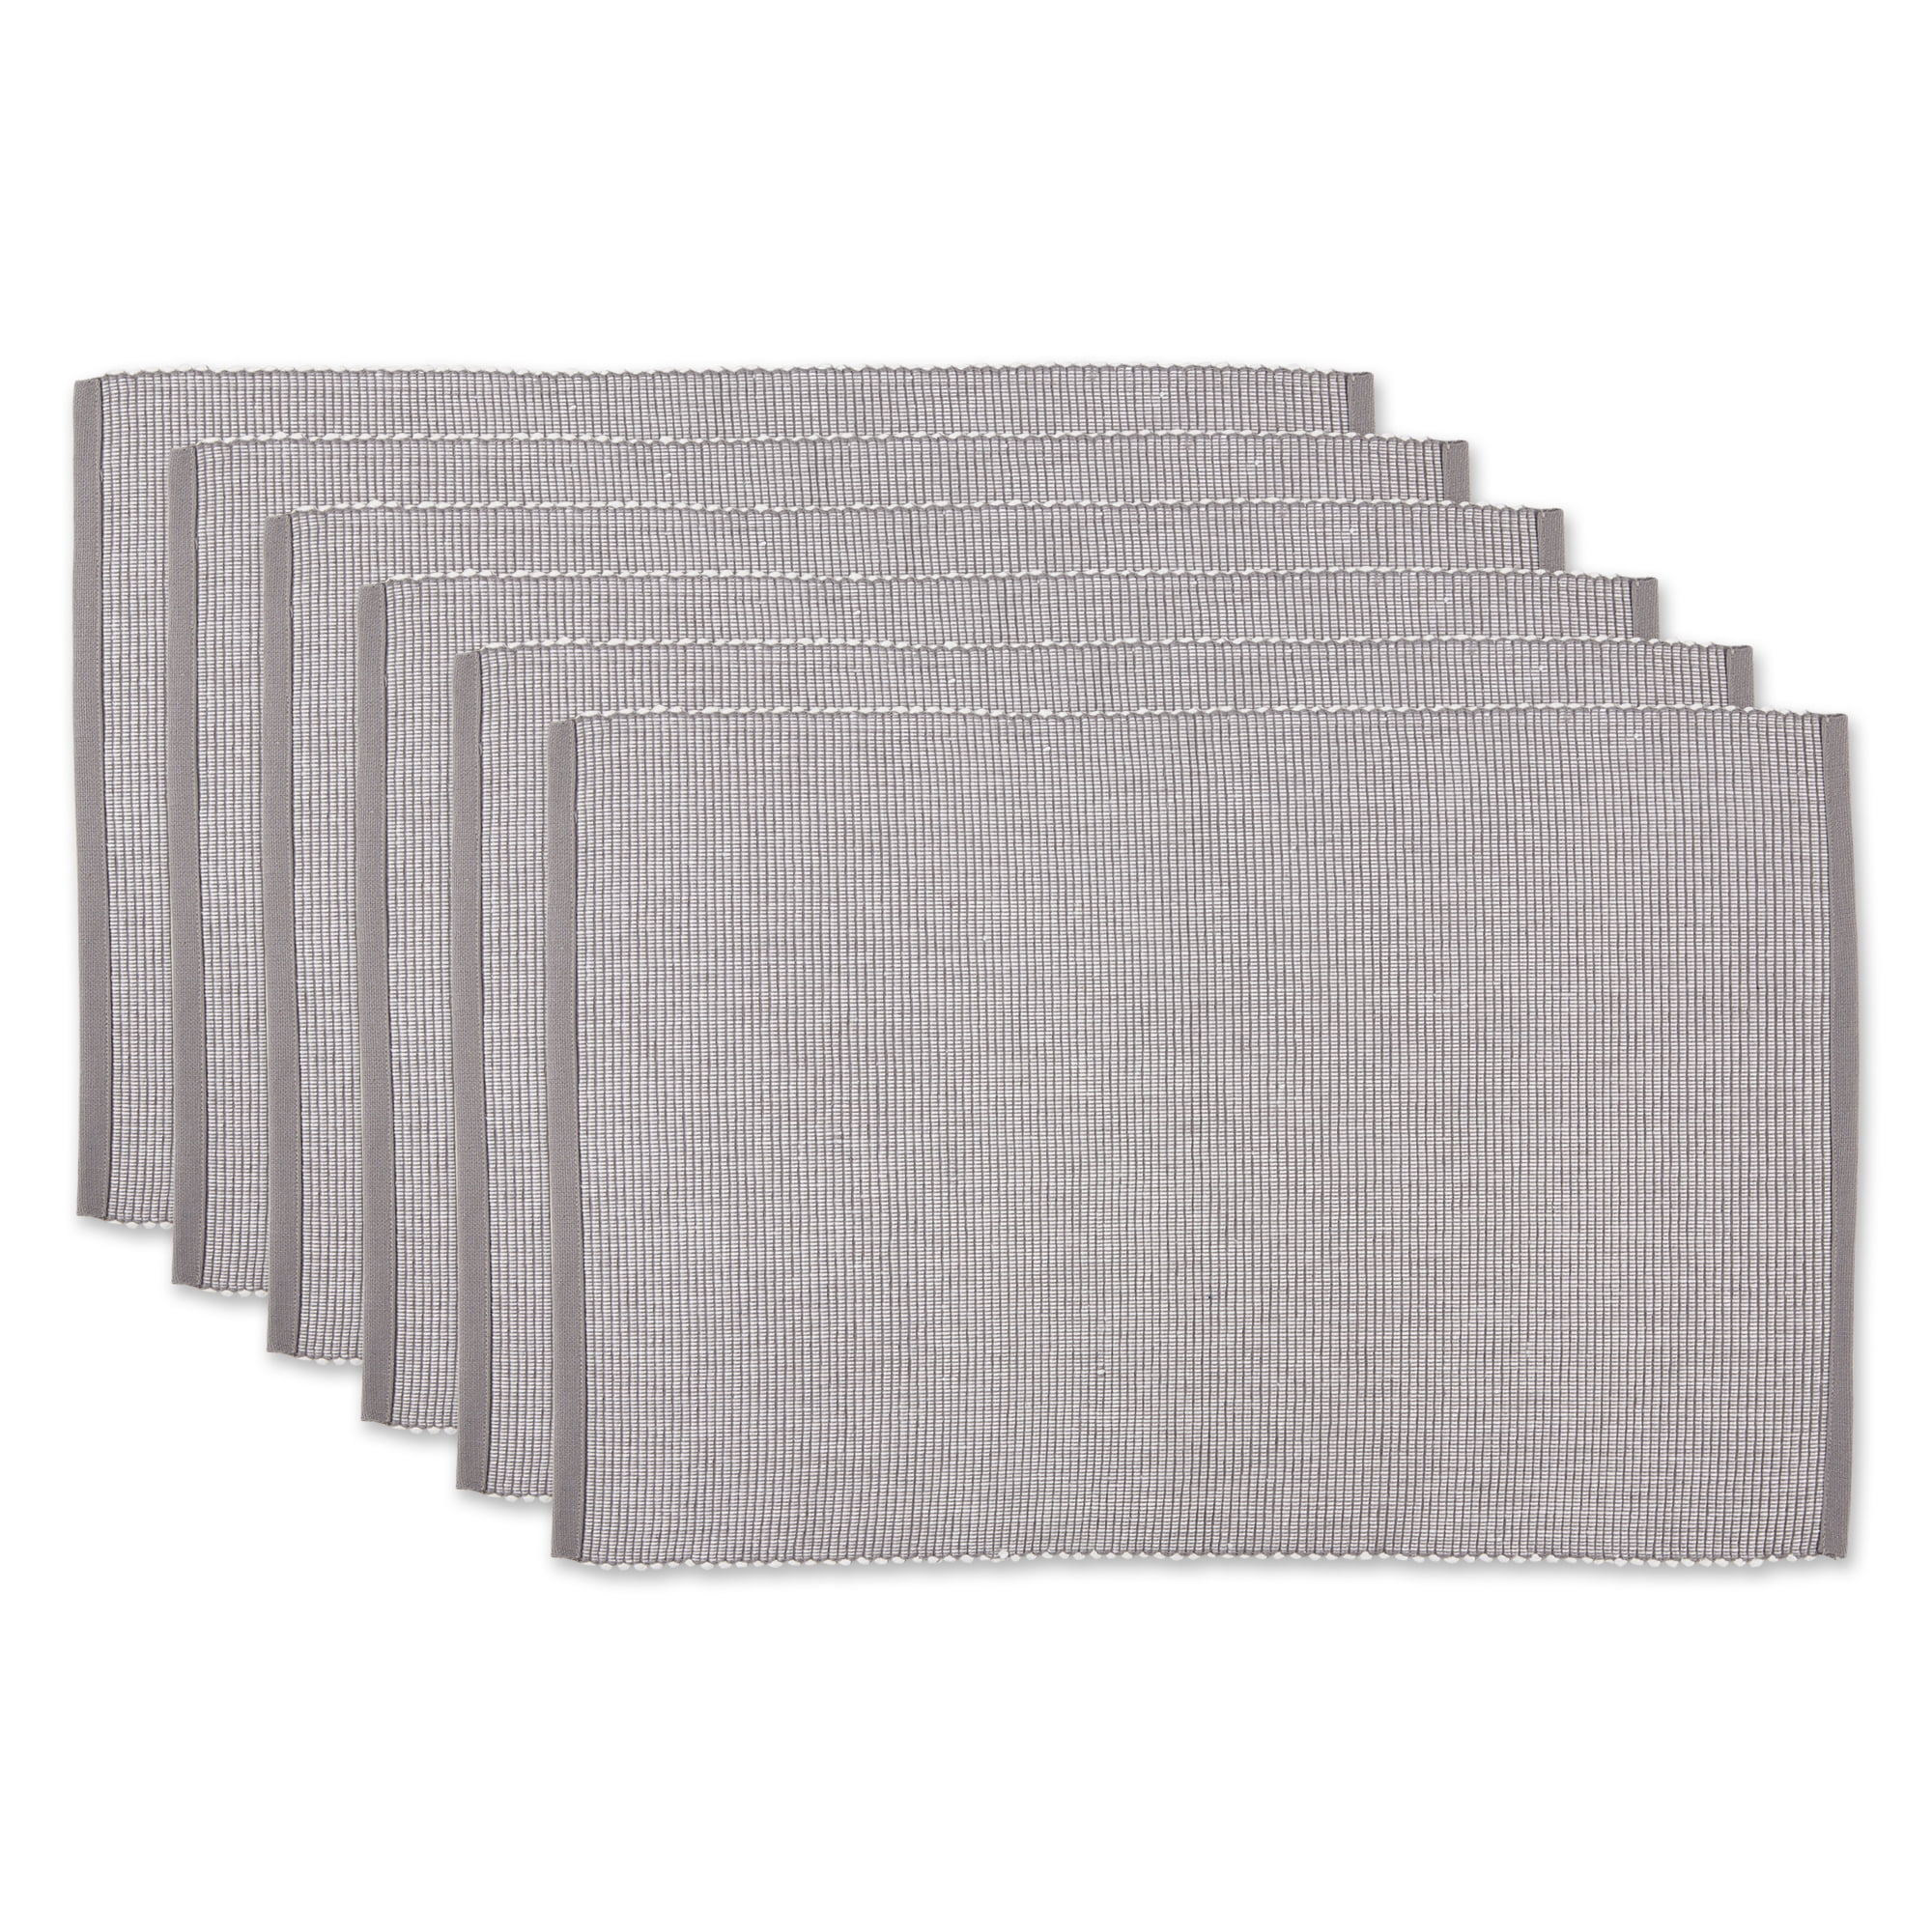 More Décor Faux Leather Placemats for Dining and Kitchen Table - Stain and Heat Resistant, Non Slip, Wipeable, Washable - Set of 6 - Light Grey